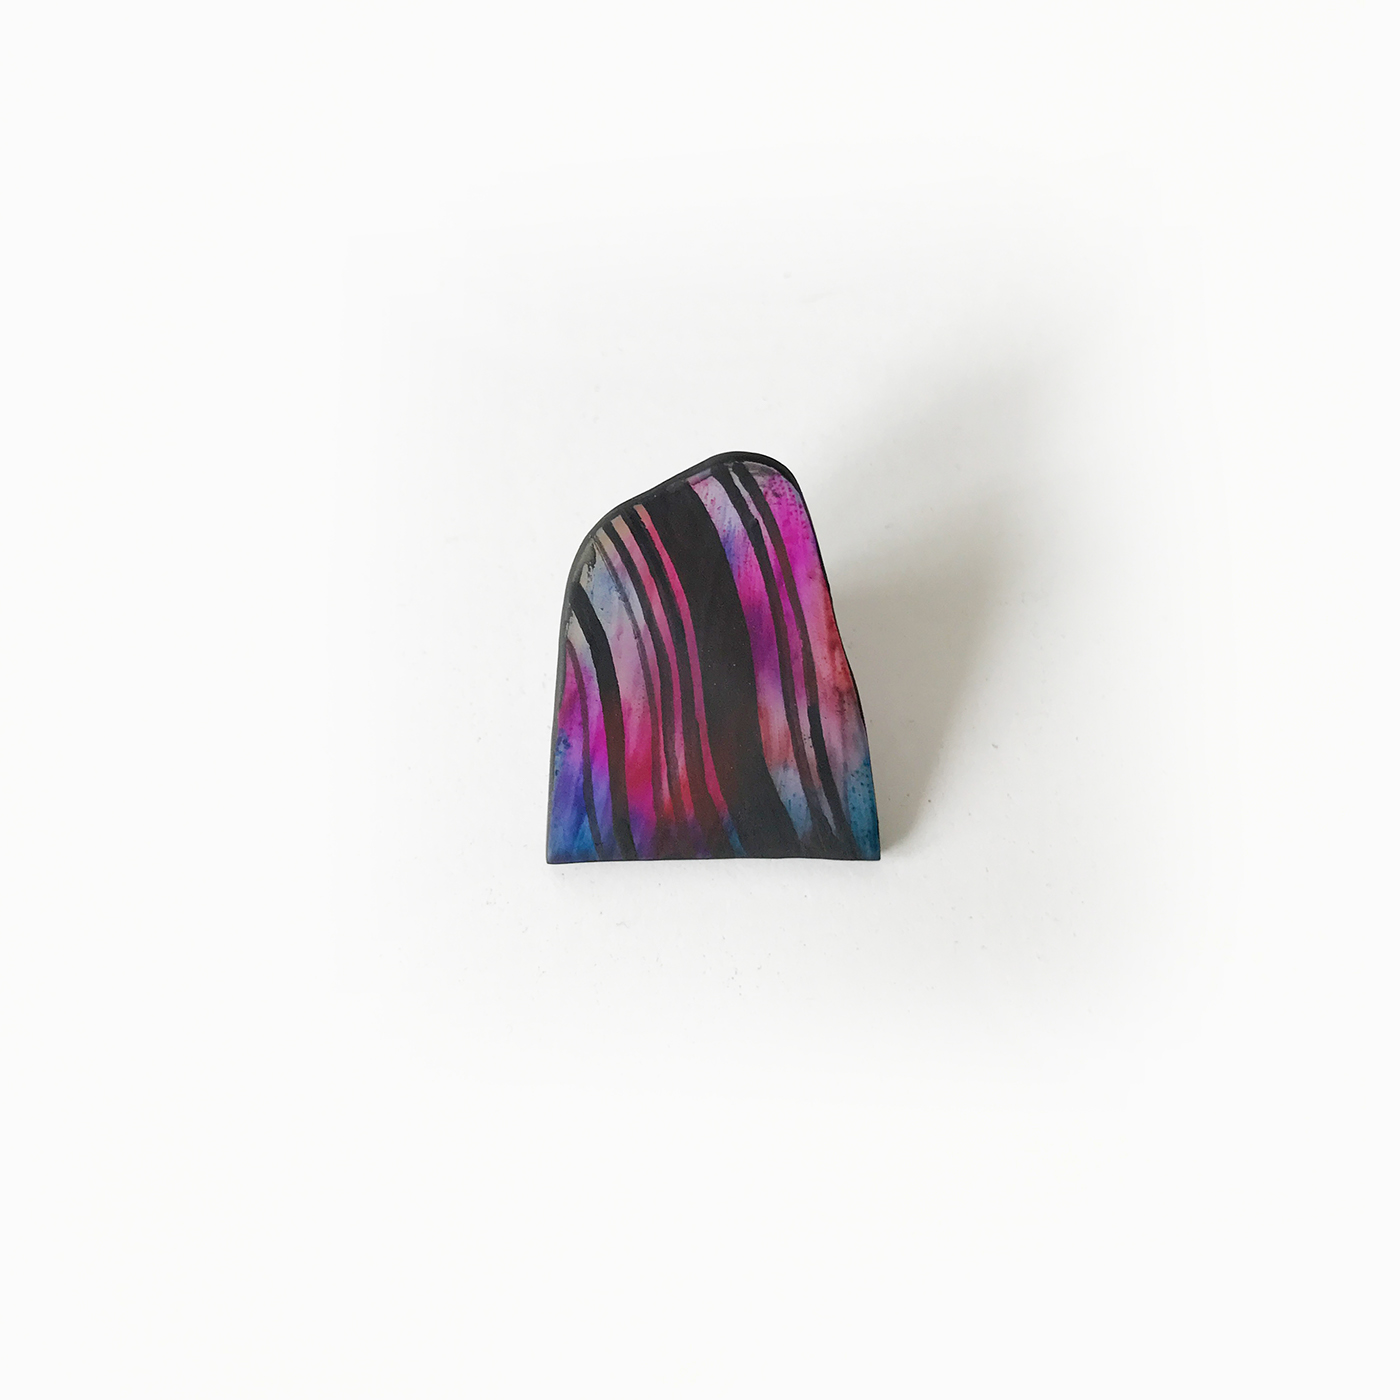 pins mountains rocks pin watercolor acrylic Accessory accessories